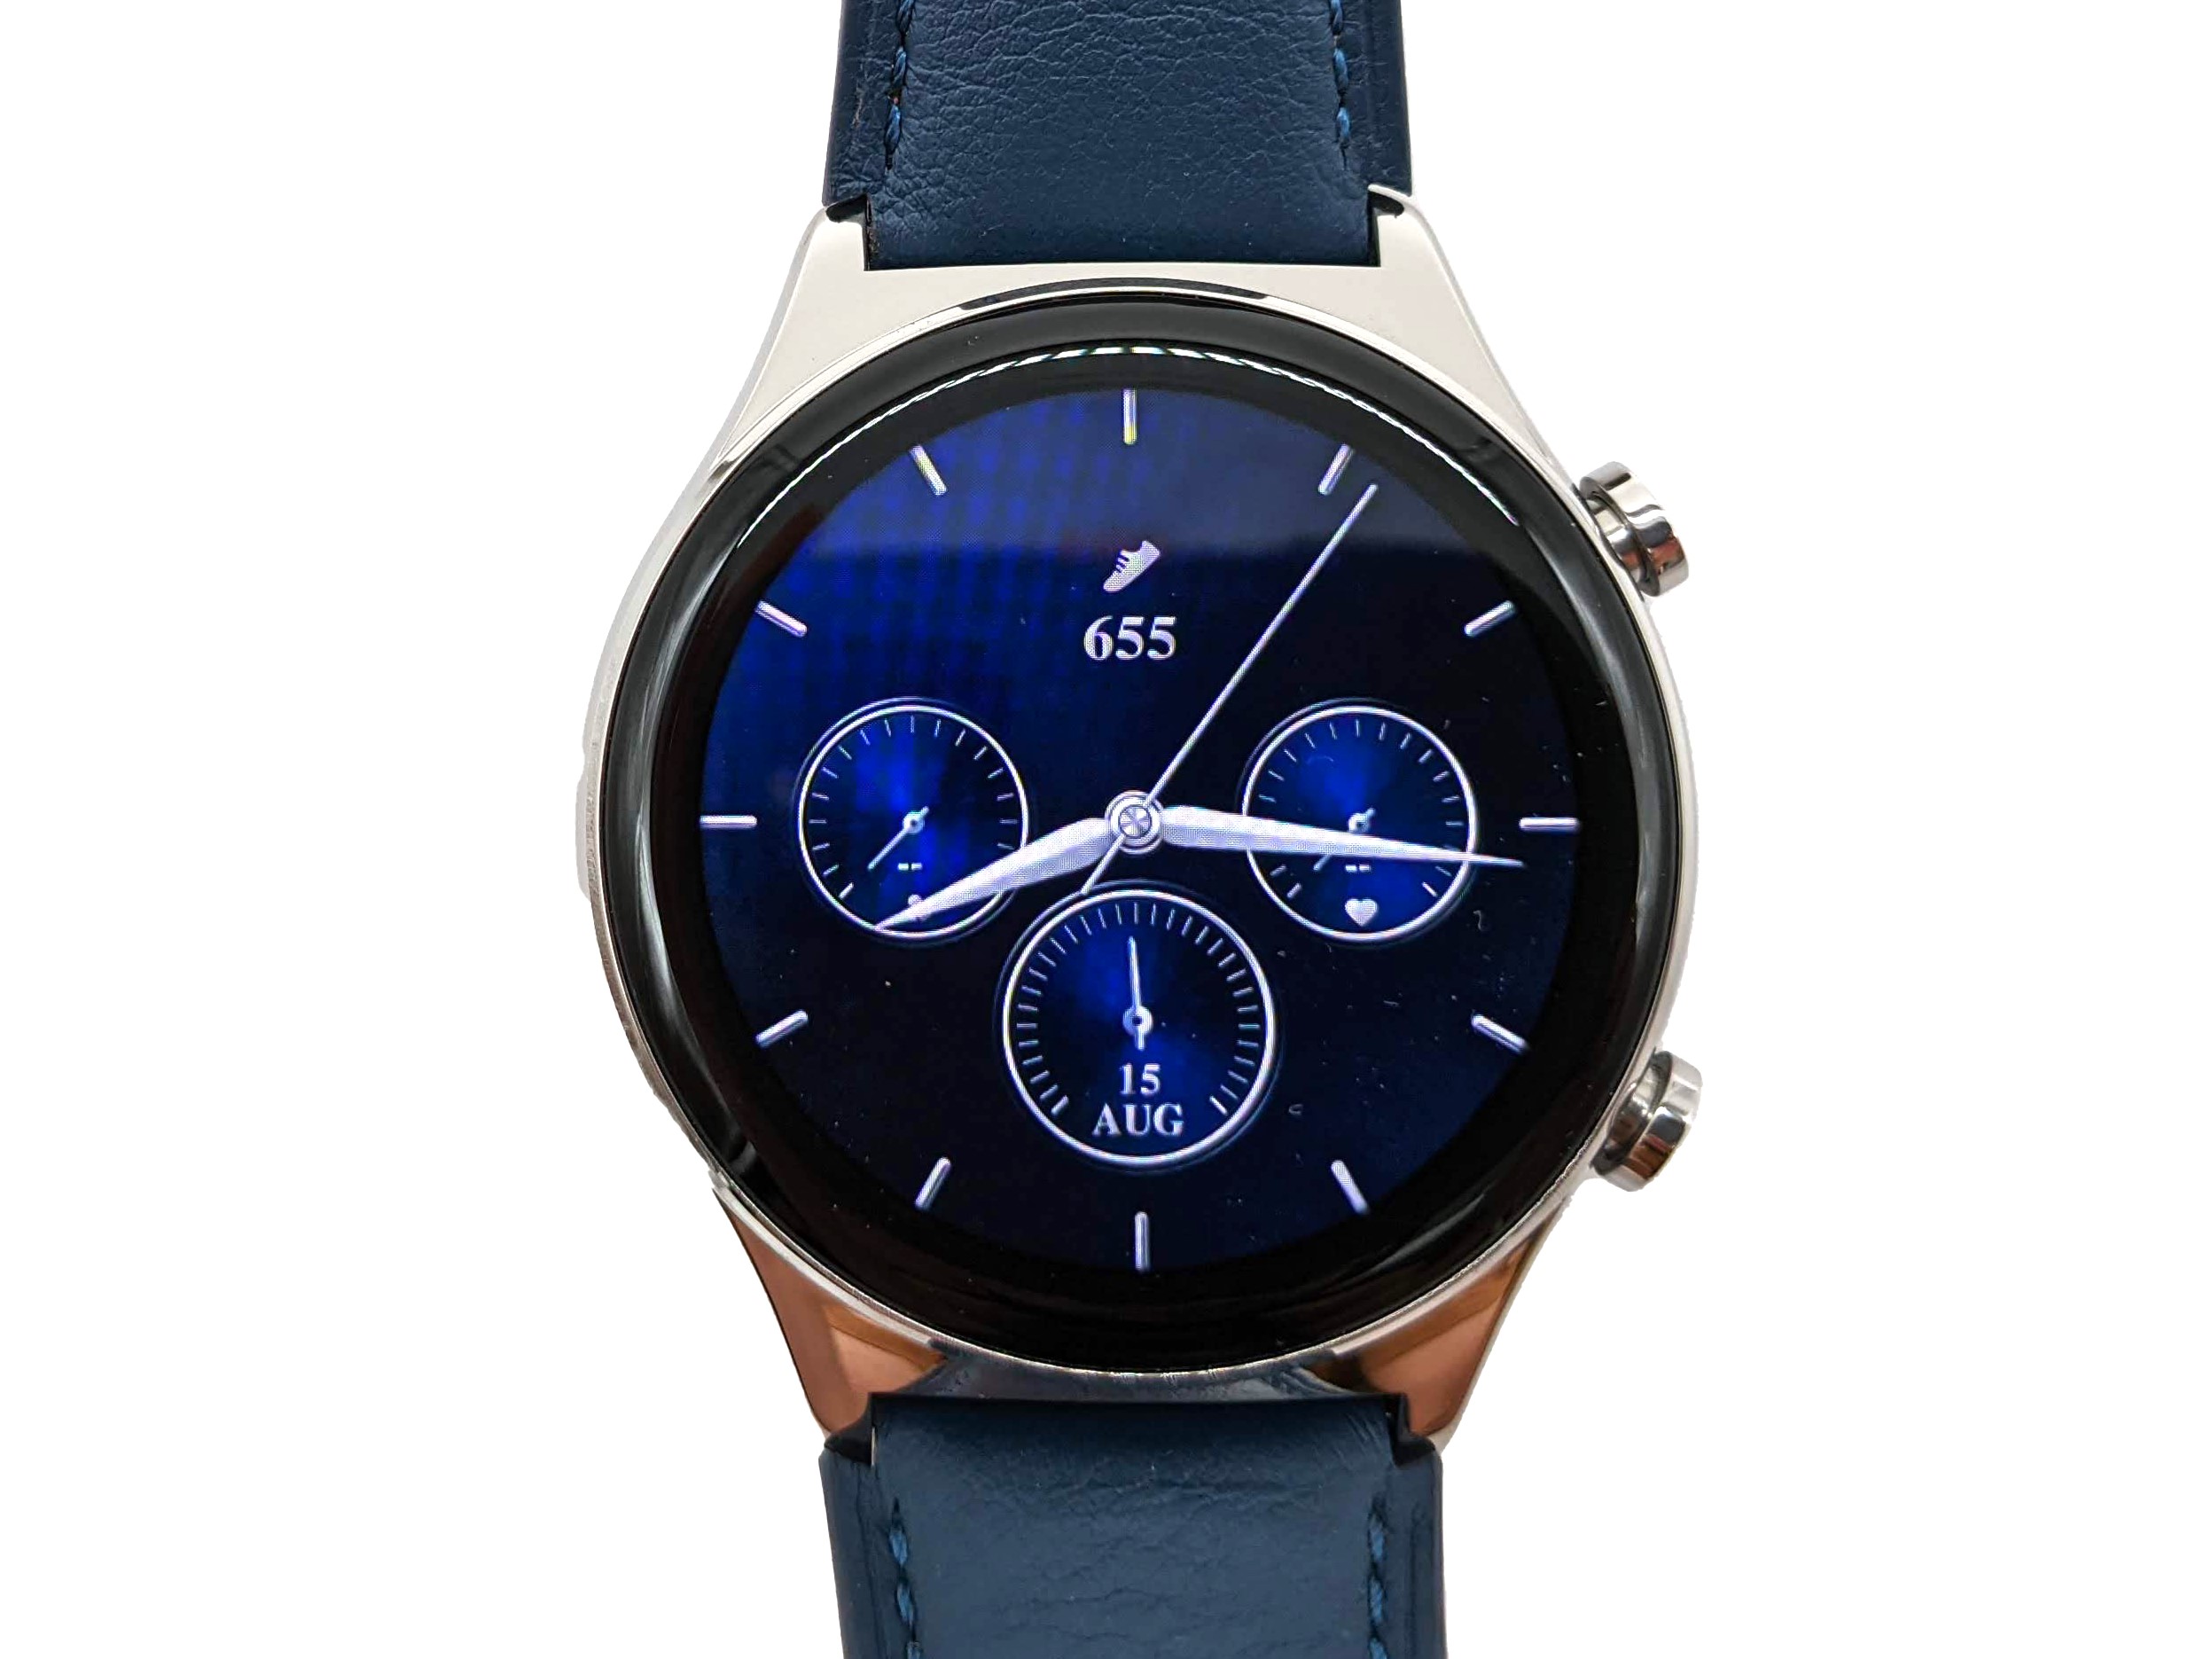  Honor Watch GS3, Smart Watch with 1.43, Blue, One Size, Watch  GS3 Watch GS 3 Blue : Everything Else